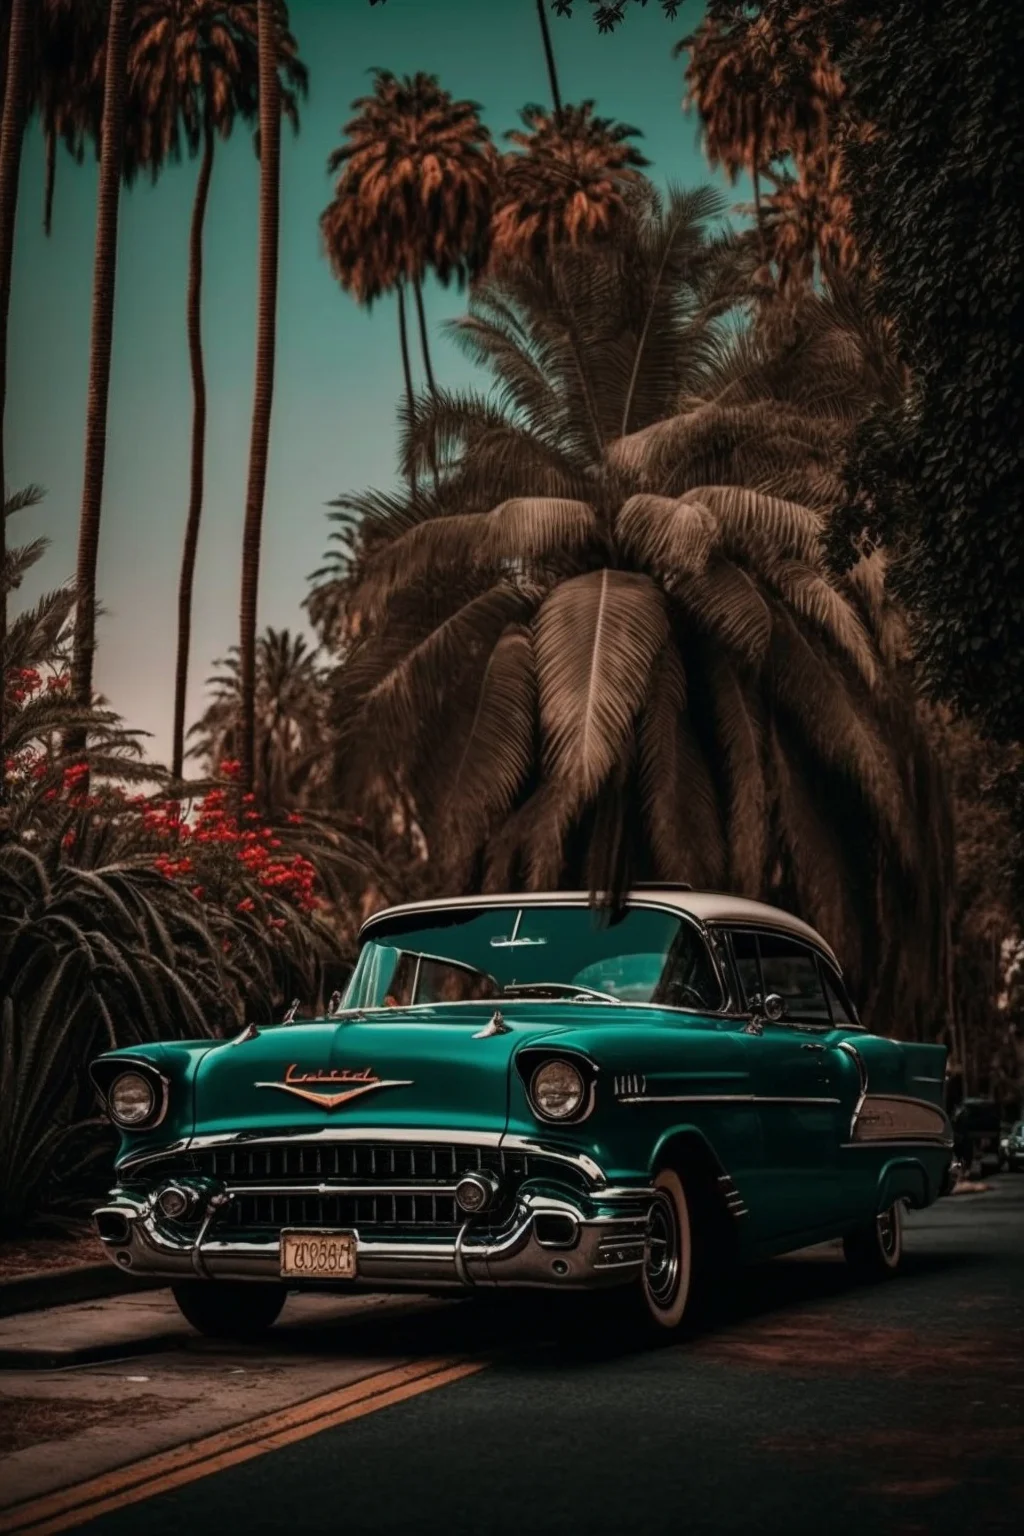 Aesthetic Vintage Car Wallpaper for iPhone 2023 It Before Me